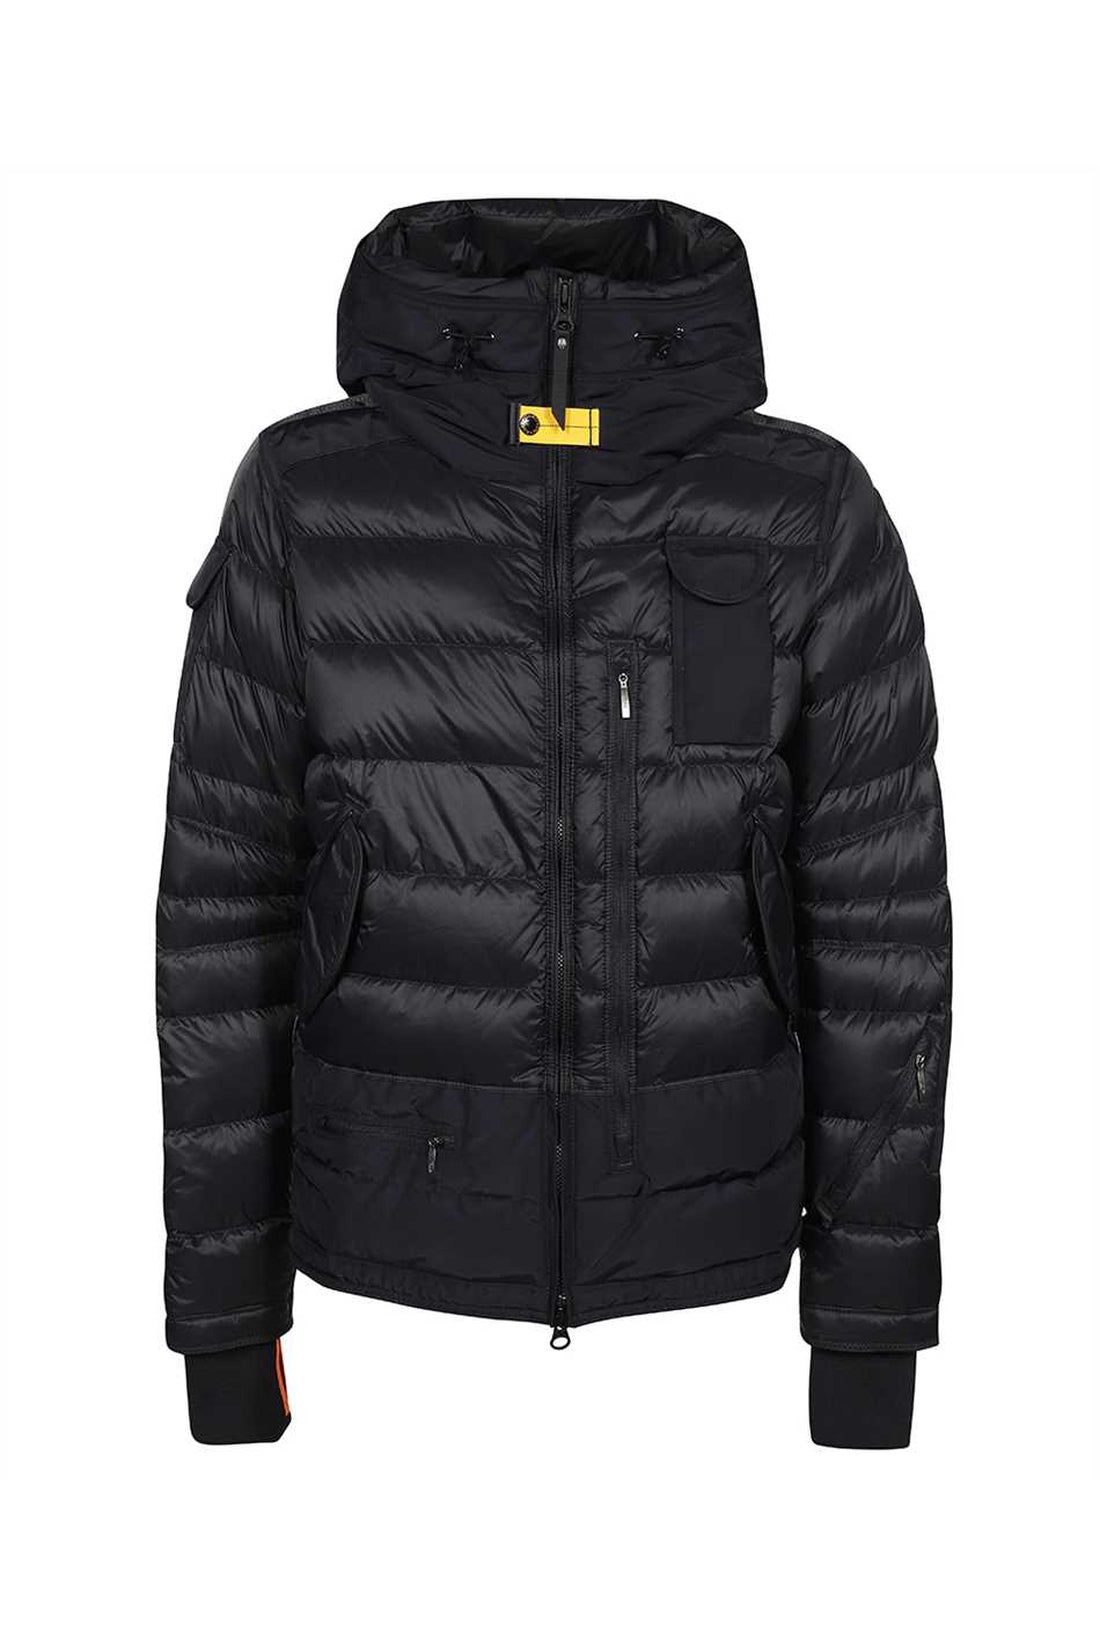 Parajumpers OUTLET | Hooded down jacket im SALE | ARCHIVIST